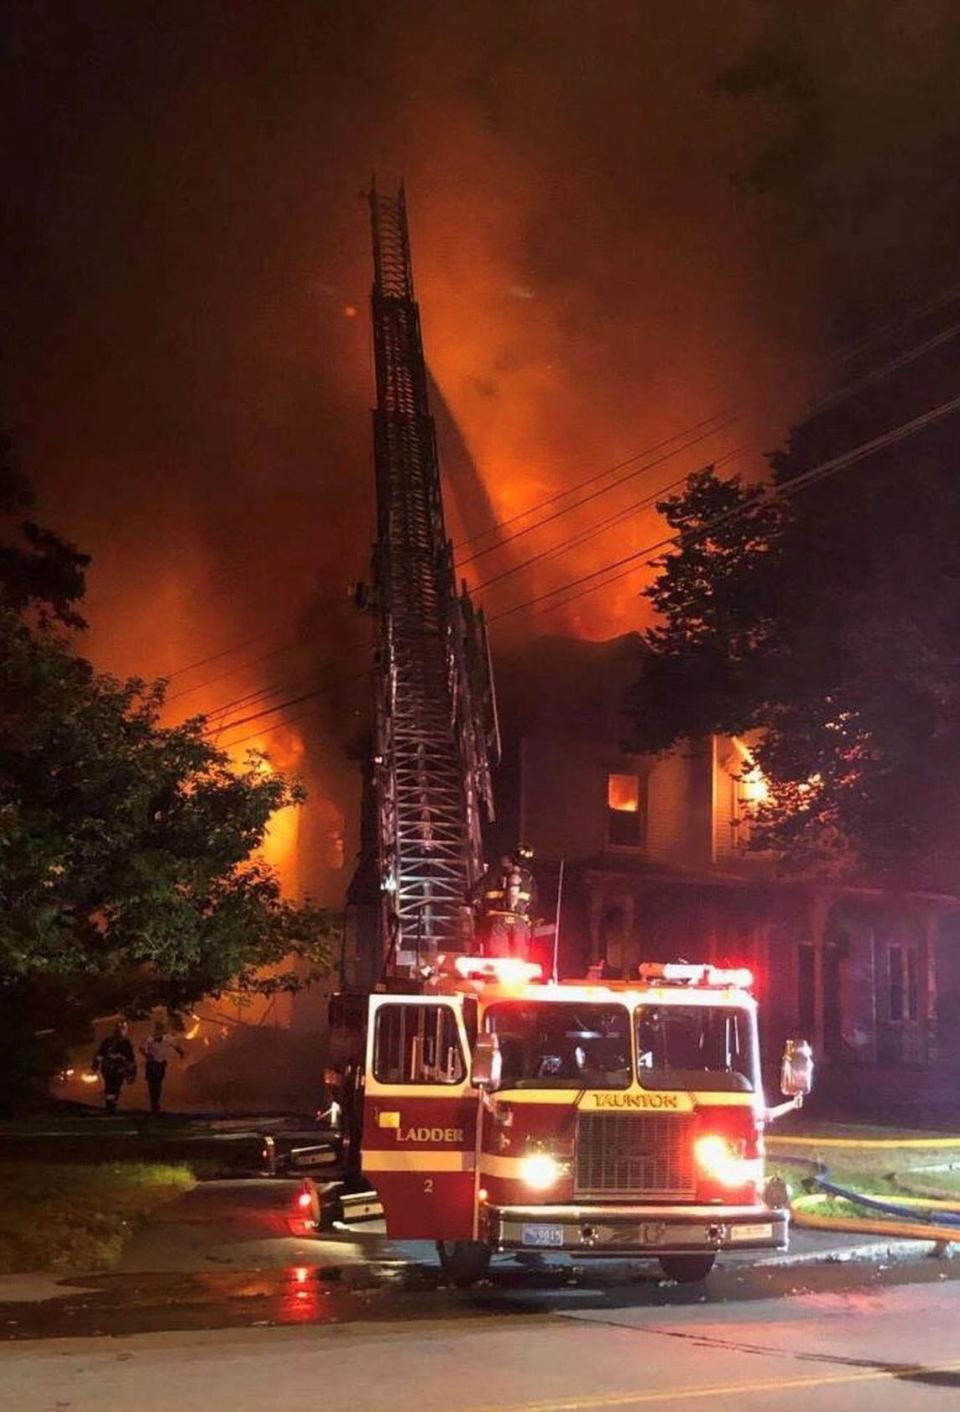 Picture of Taunton Fire Department ladder truck in action during a blaze on Harrison St. August 2019.